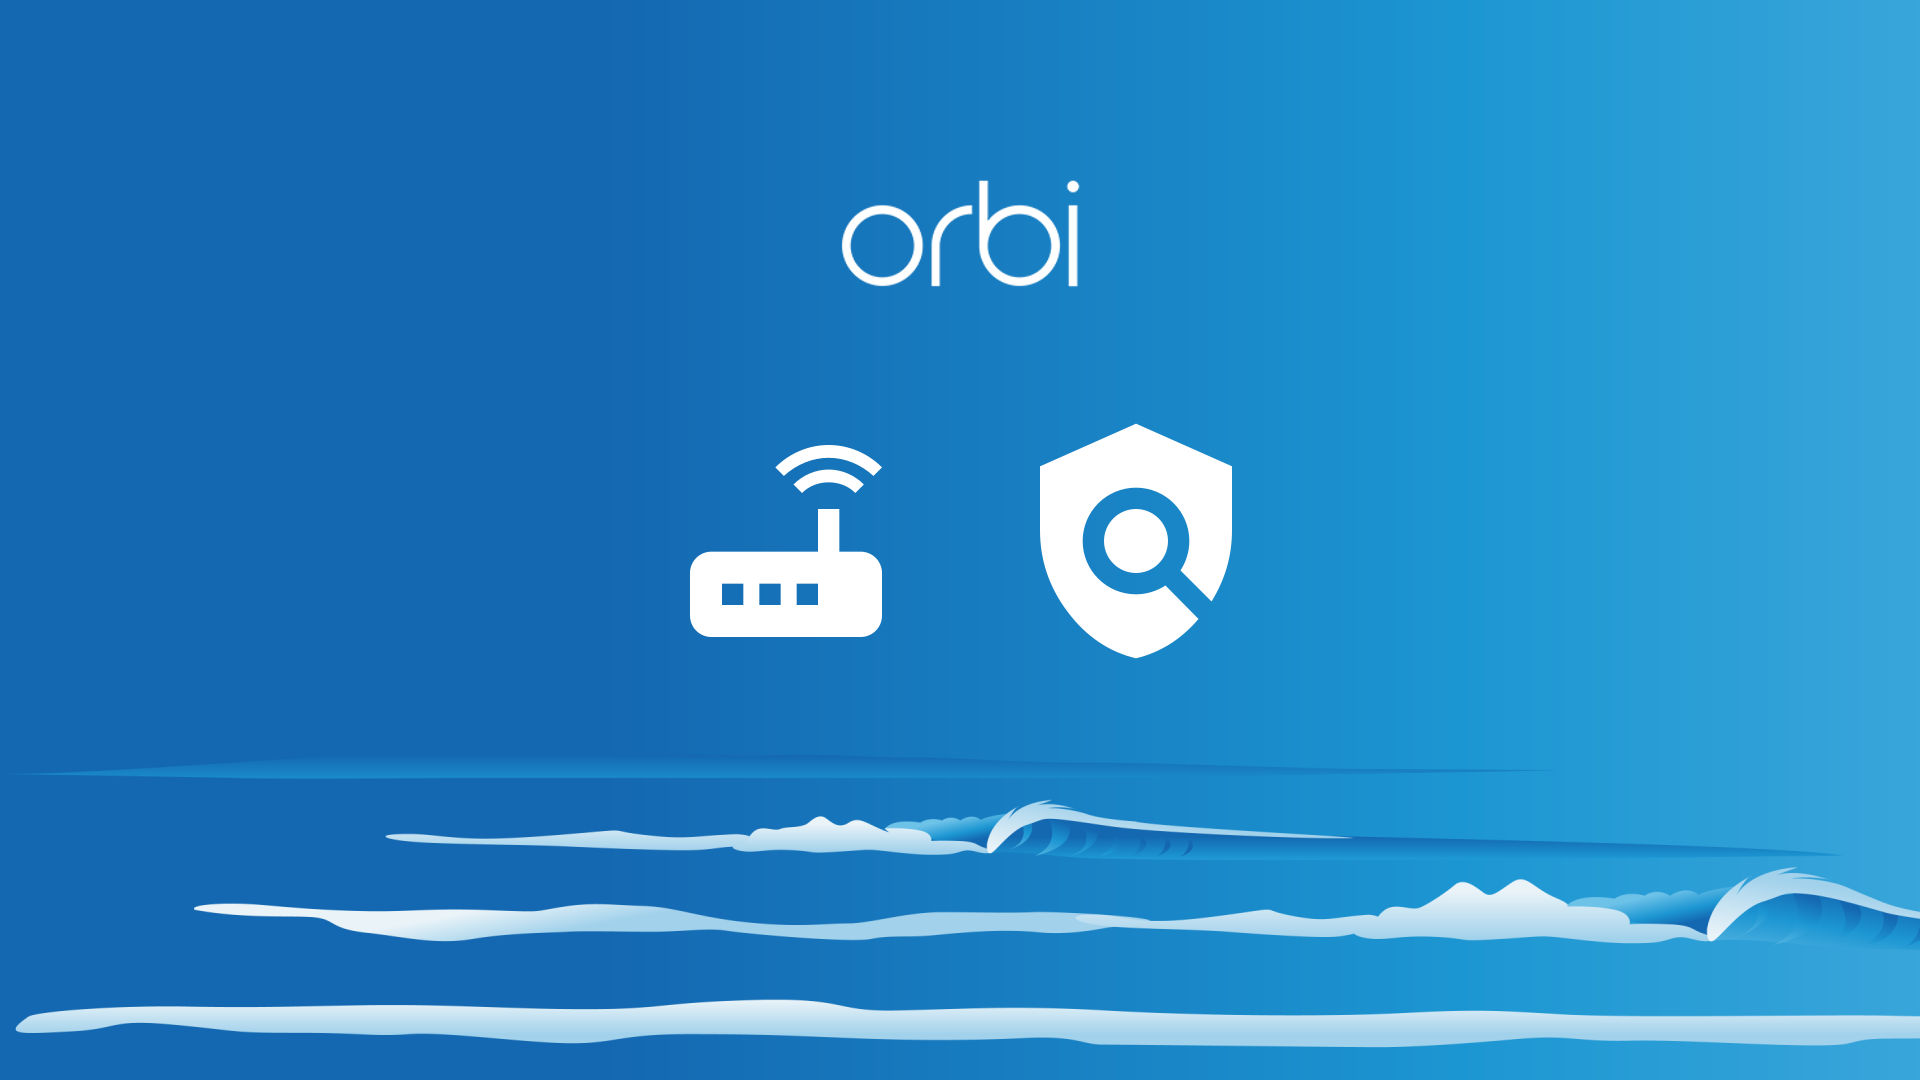 Sea background with Orbi logo and wireless router icon